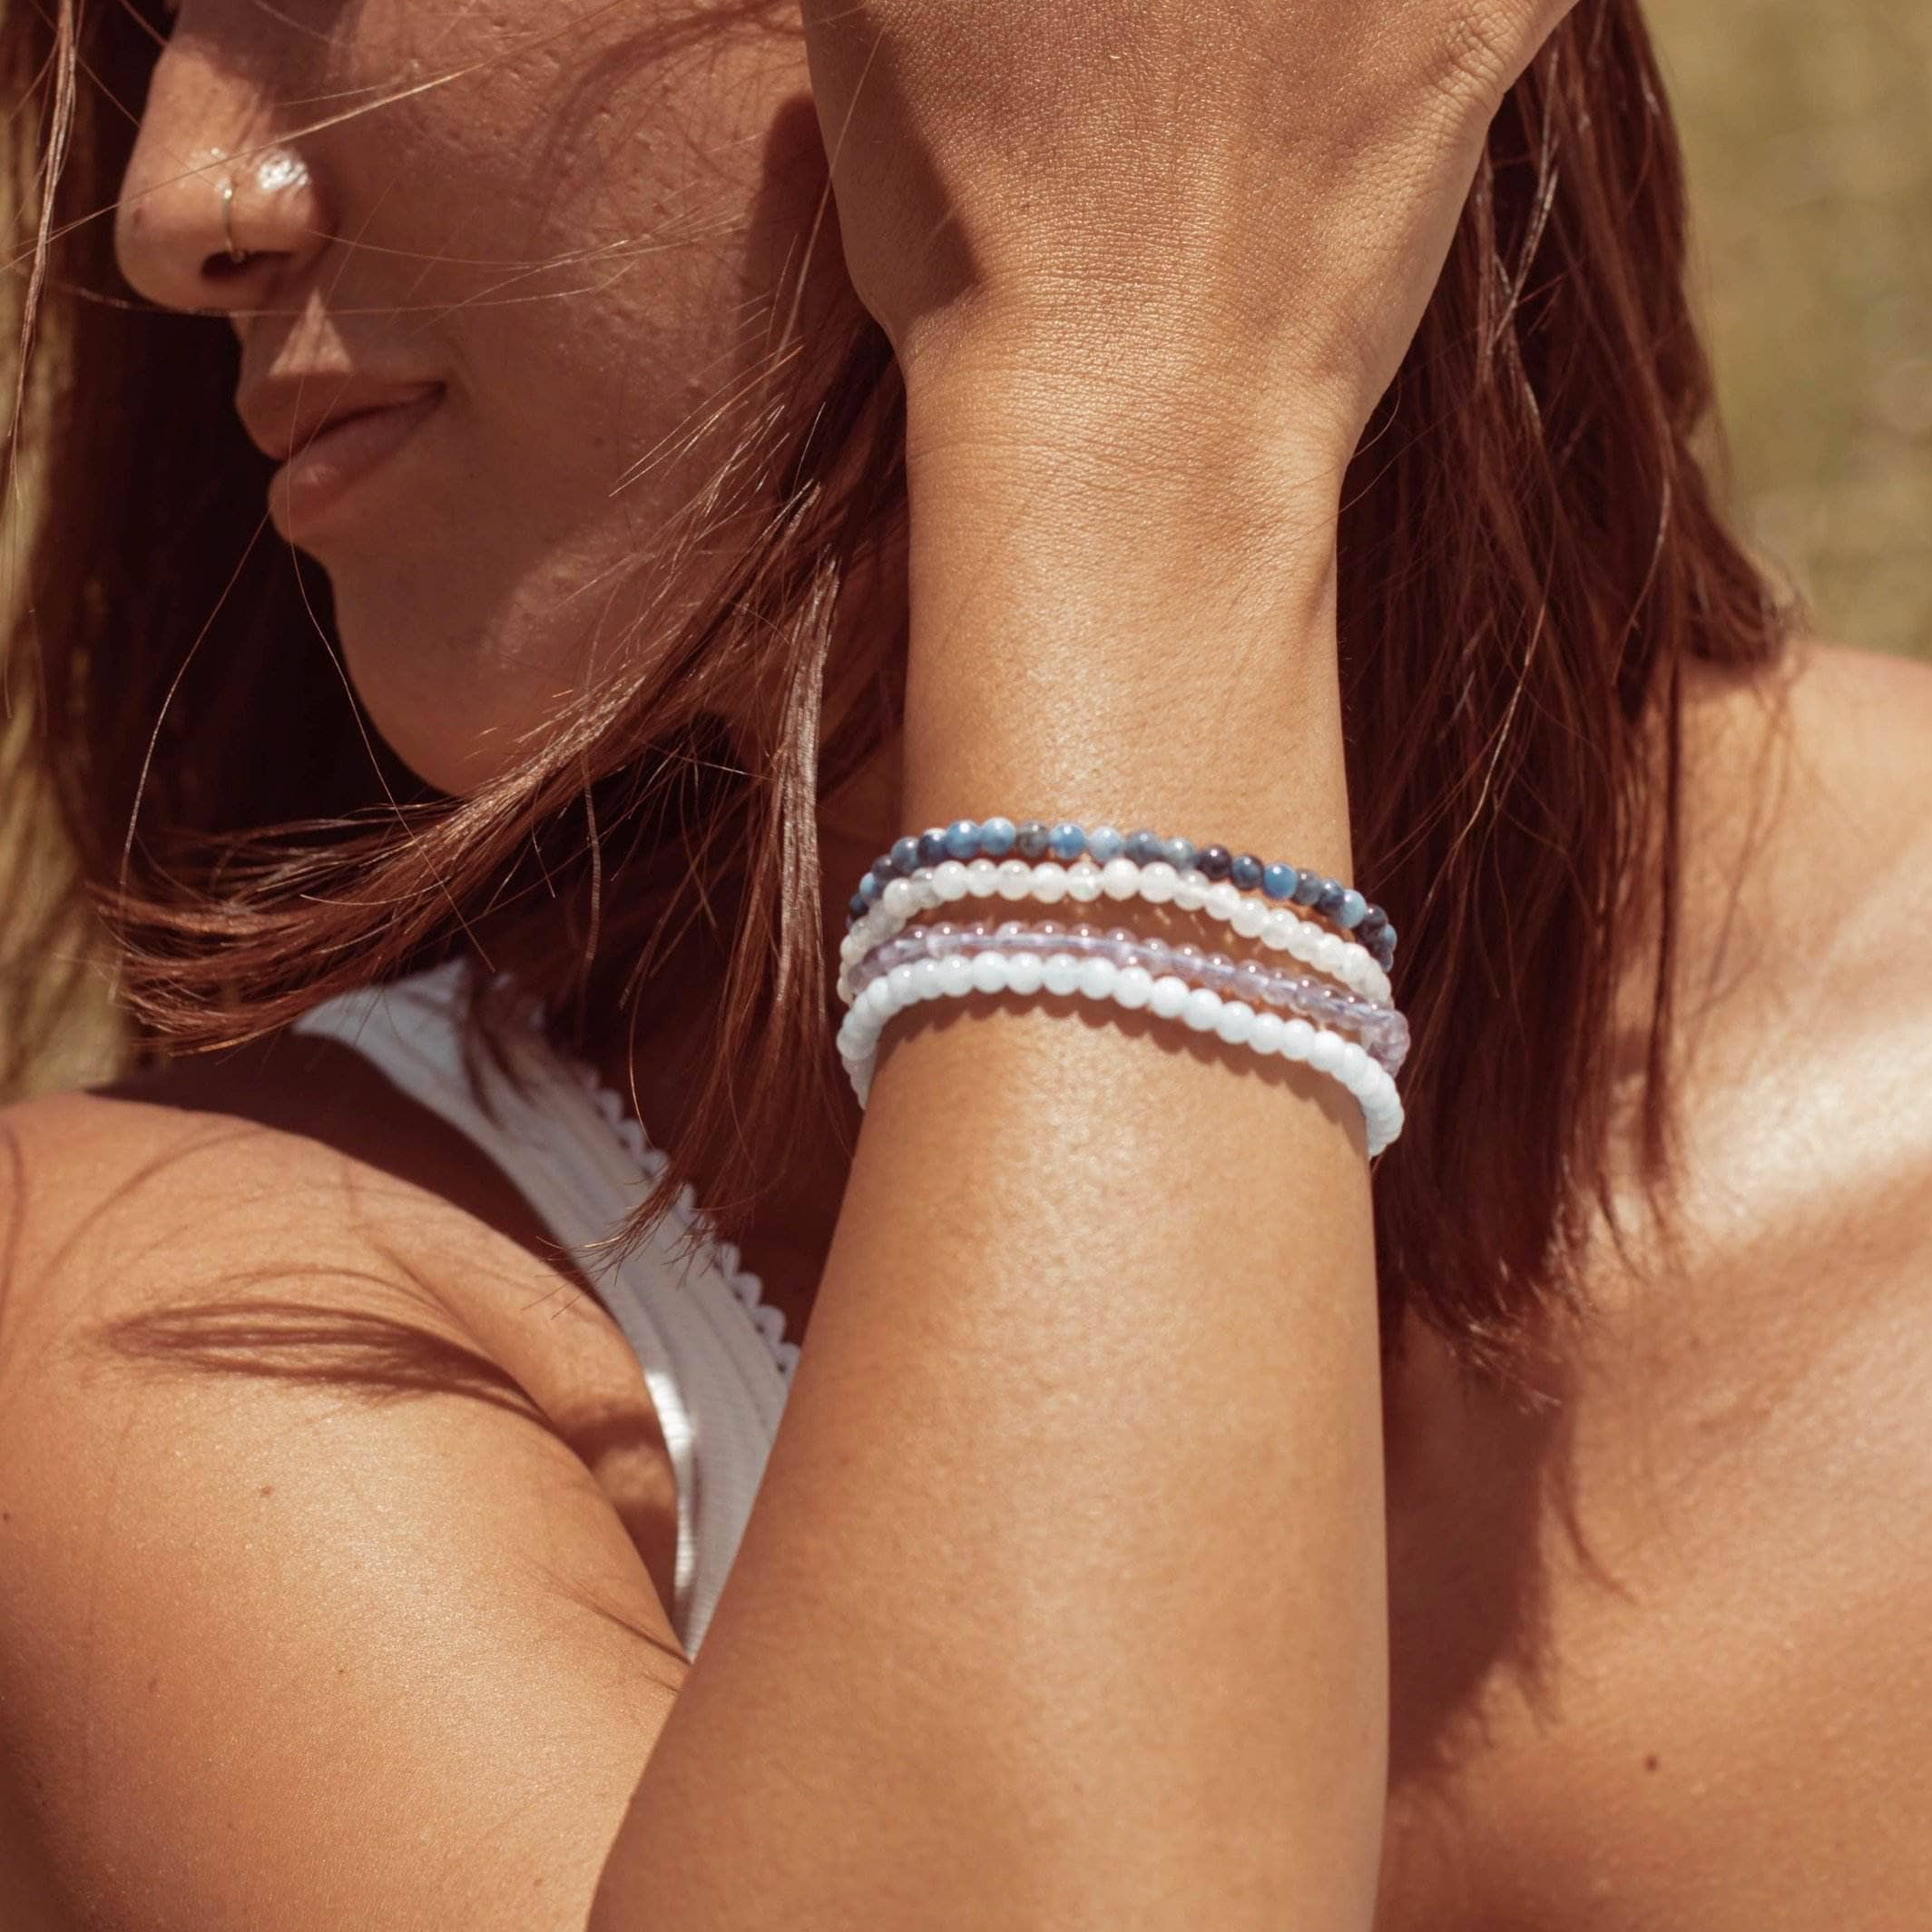 Moon Phase Energy Bracelet Pack by Tiny Rituals L